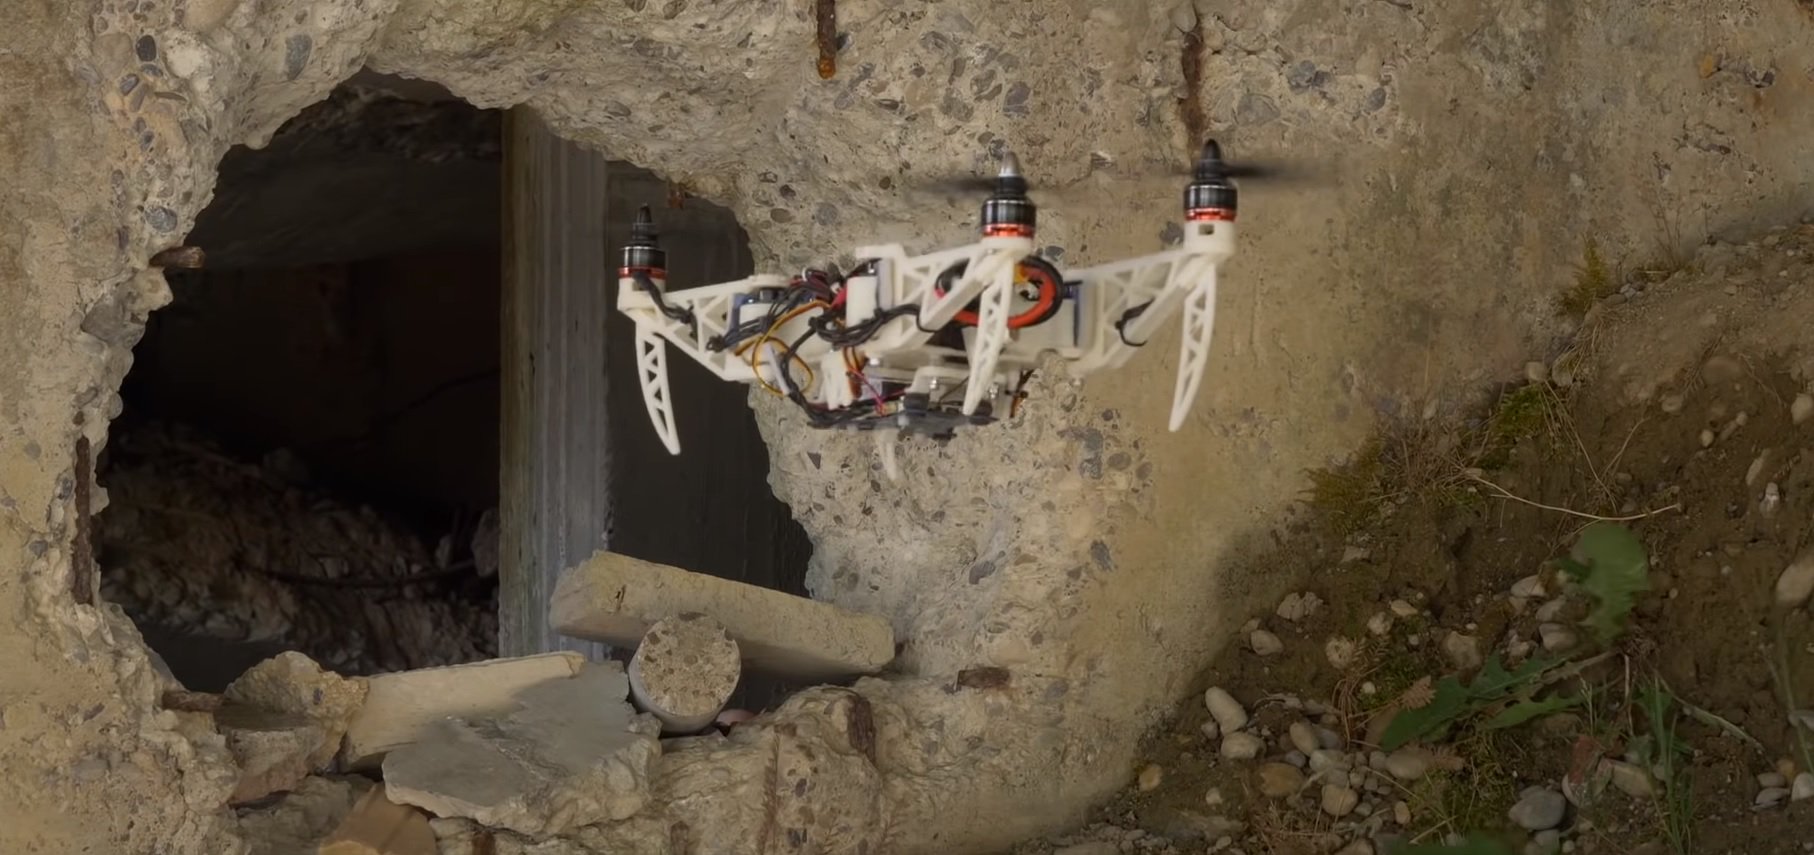 #video | Developed the compact drone, changing its shape in flight